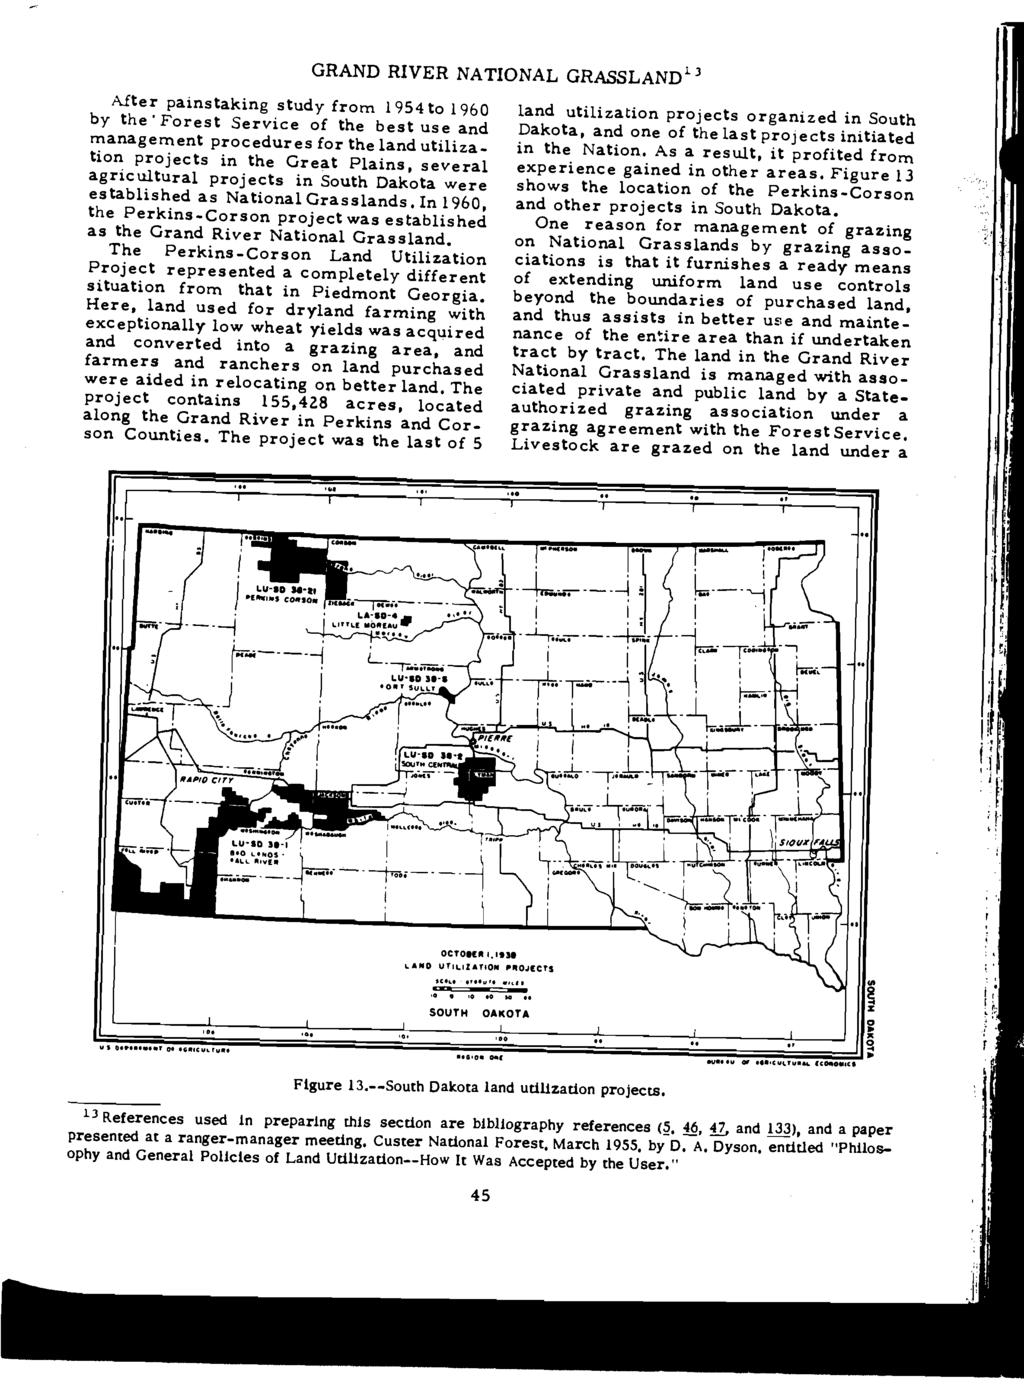 After painstaking study from 1954to 1960 by the Forest Service of the best use arid managerrent procedures for the land utiliza tion projects in the Great Plains, several agricultural projects in